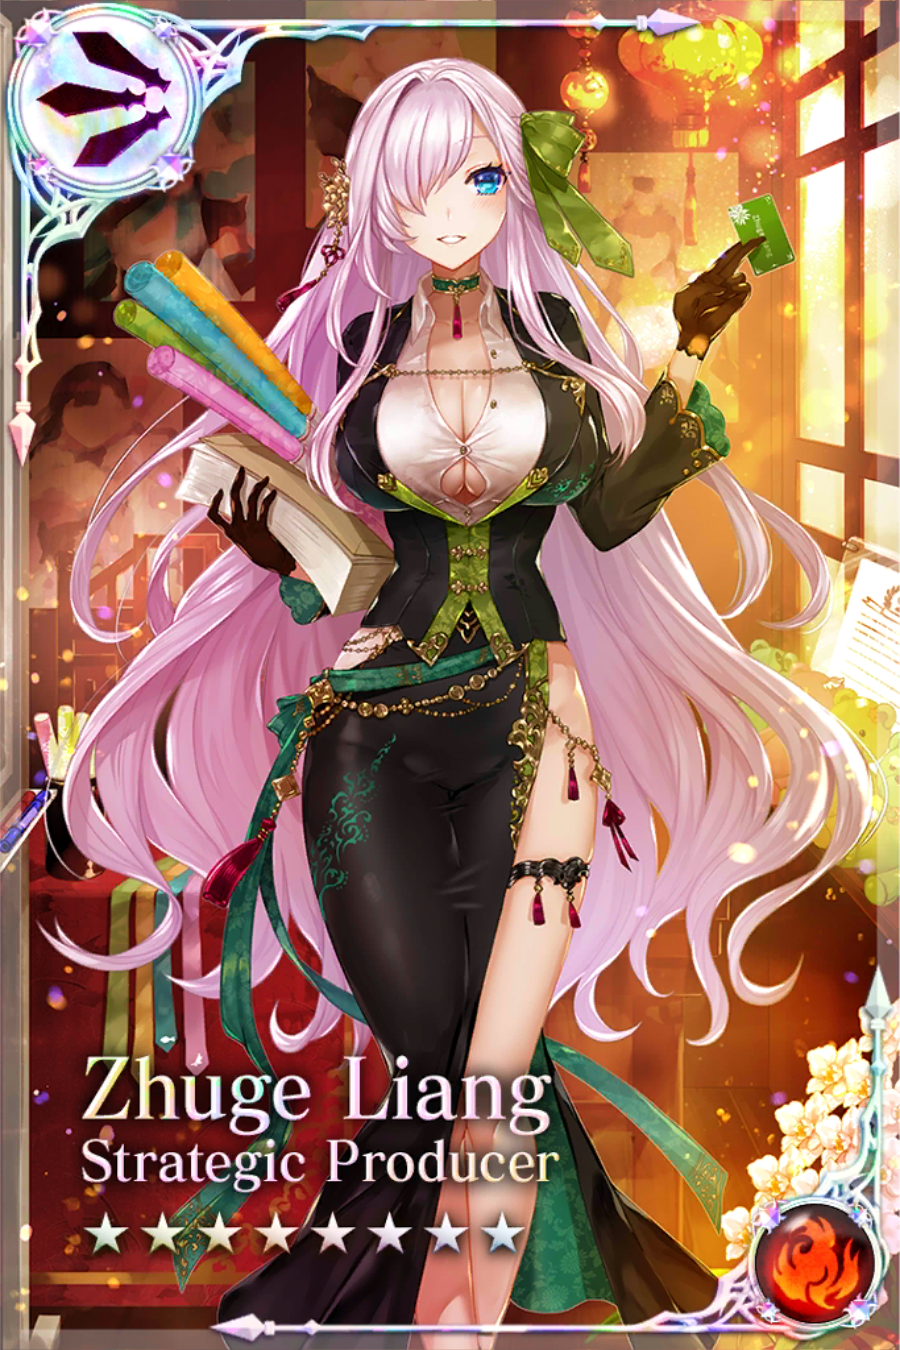 Zhuge Liang (Collection) | Age of Ishtaria Wiki | Fandom